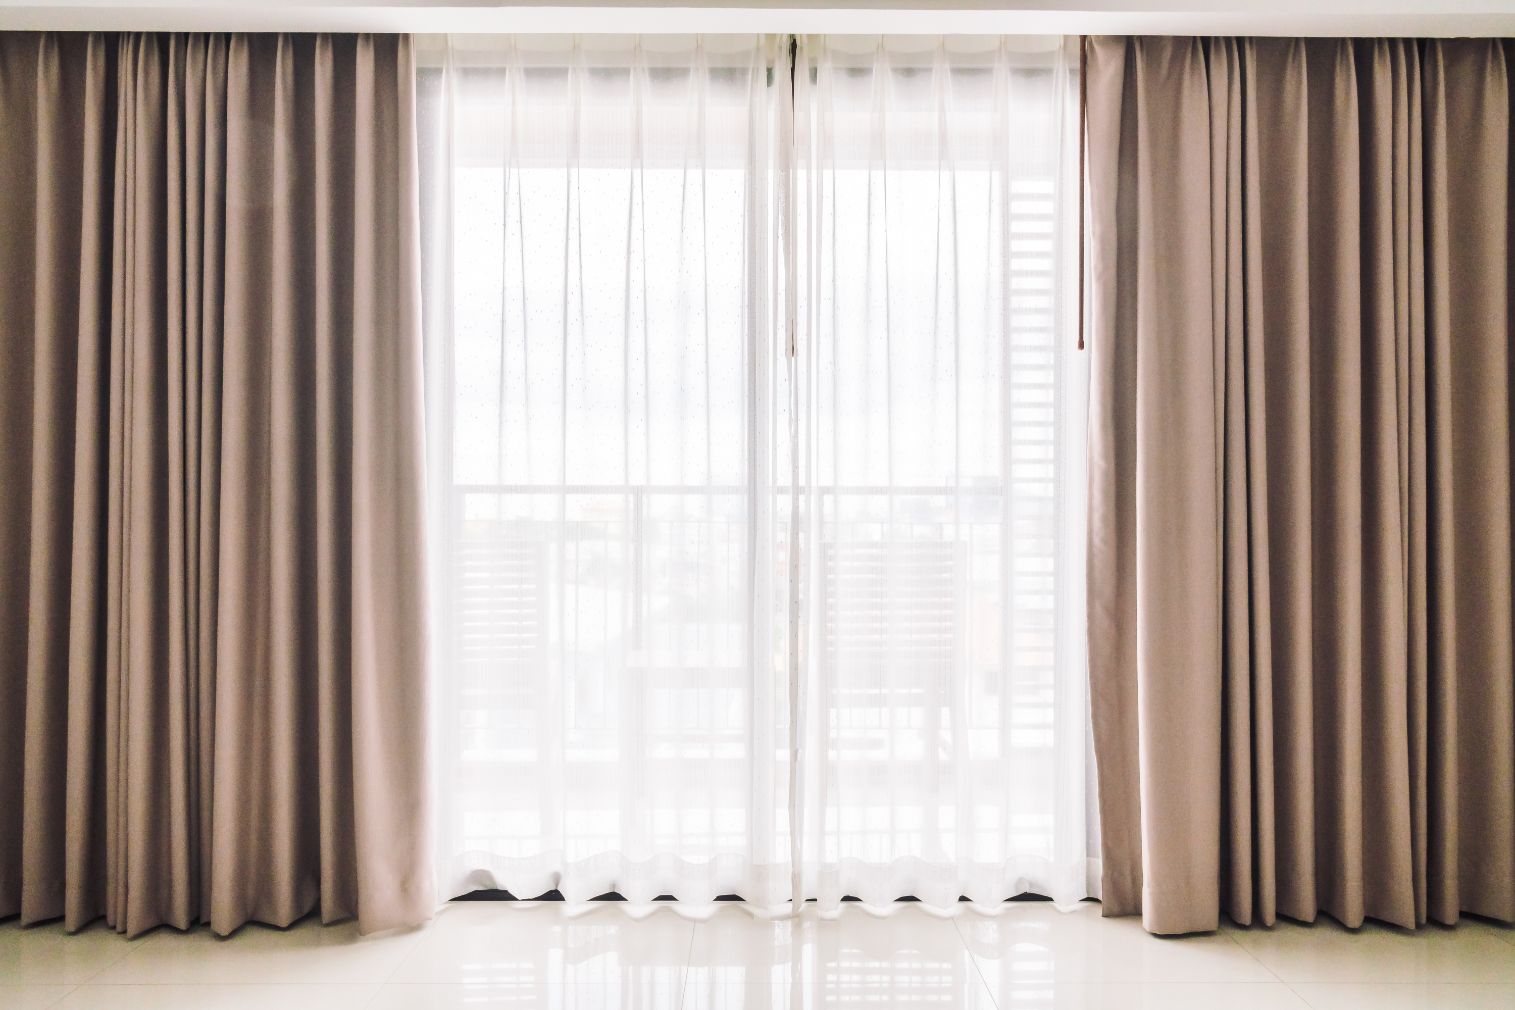 Curtains - Homestead Blinds in Wodonga VIC